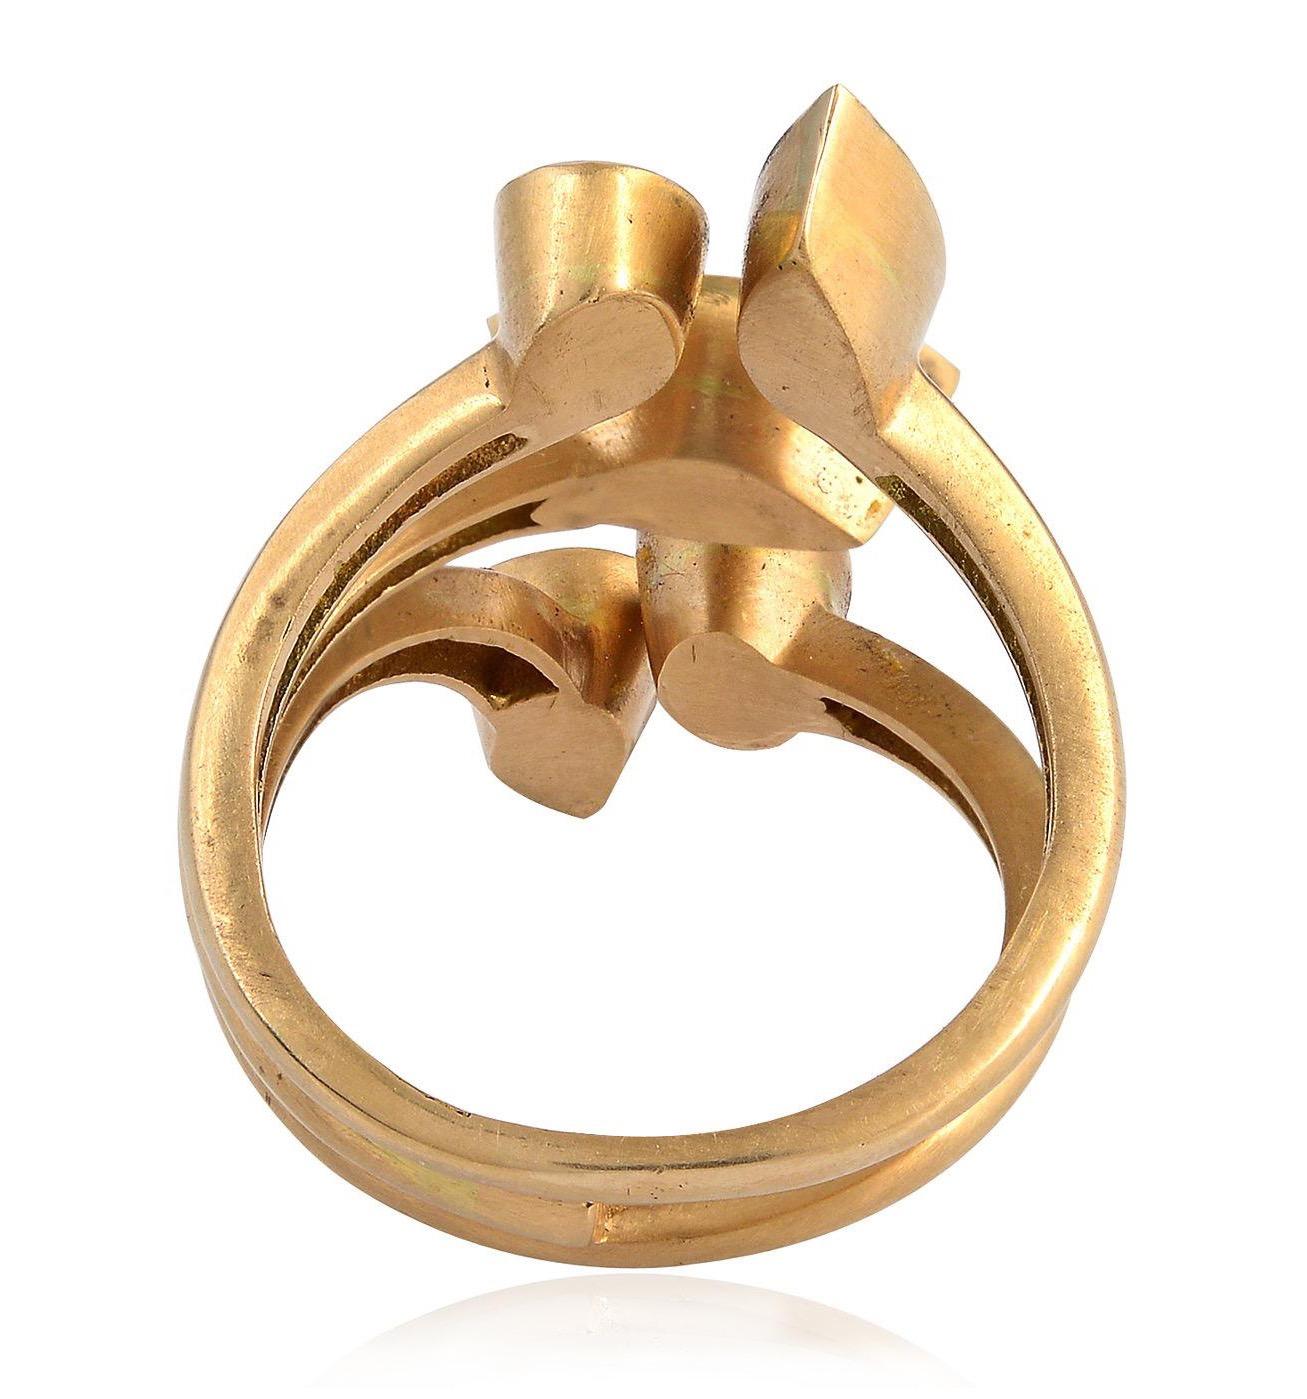 This ring has been meticulously crafted from 18-karat yellow gold & sterling silver. It is set in 1.24 carats of rose cut diamonds. Also available in rose gold.

The ring is a size 7 and may be resized to larger or smaller upon request. 
FOLLOW 